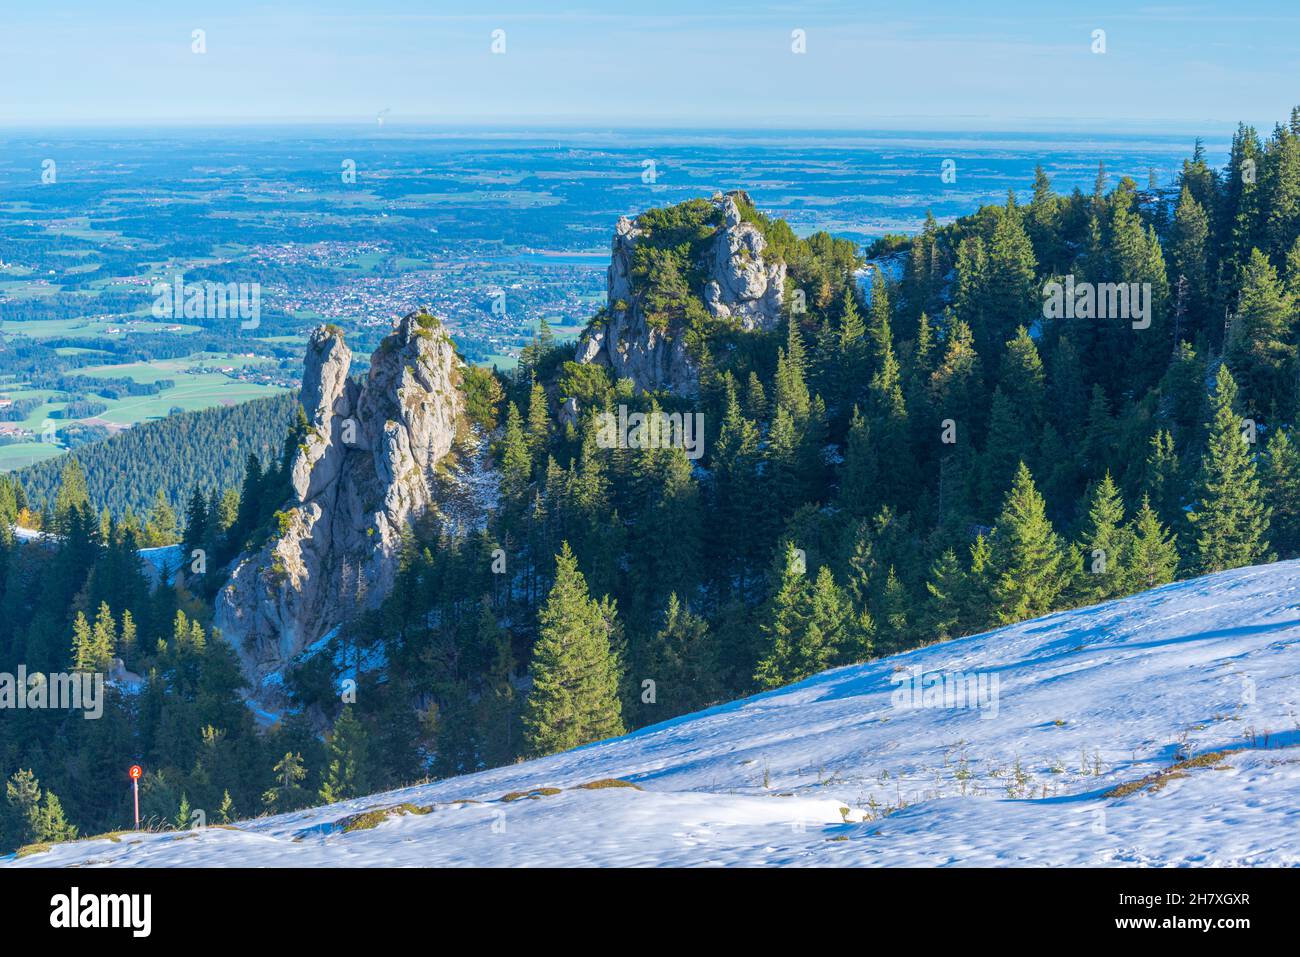 Kampenwand mountains at about  1500m asl with panoramic views, cable car from Aschau, Chiemgauer Alps, Upper Bavaria Southern Germany, Europe Stock Photo